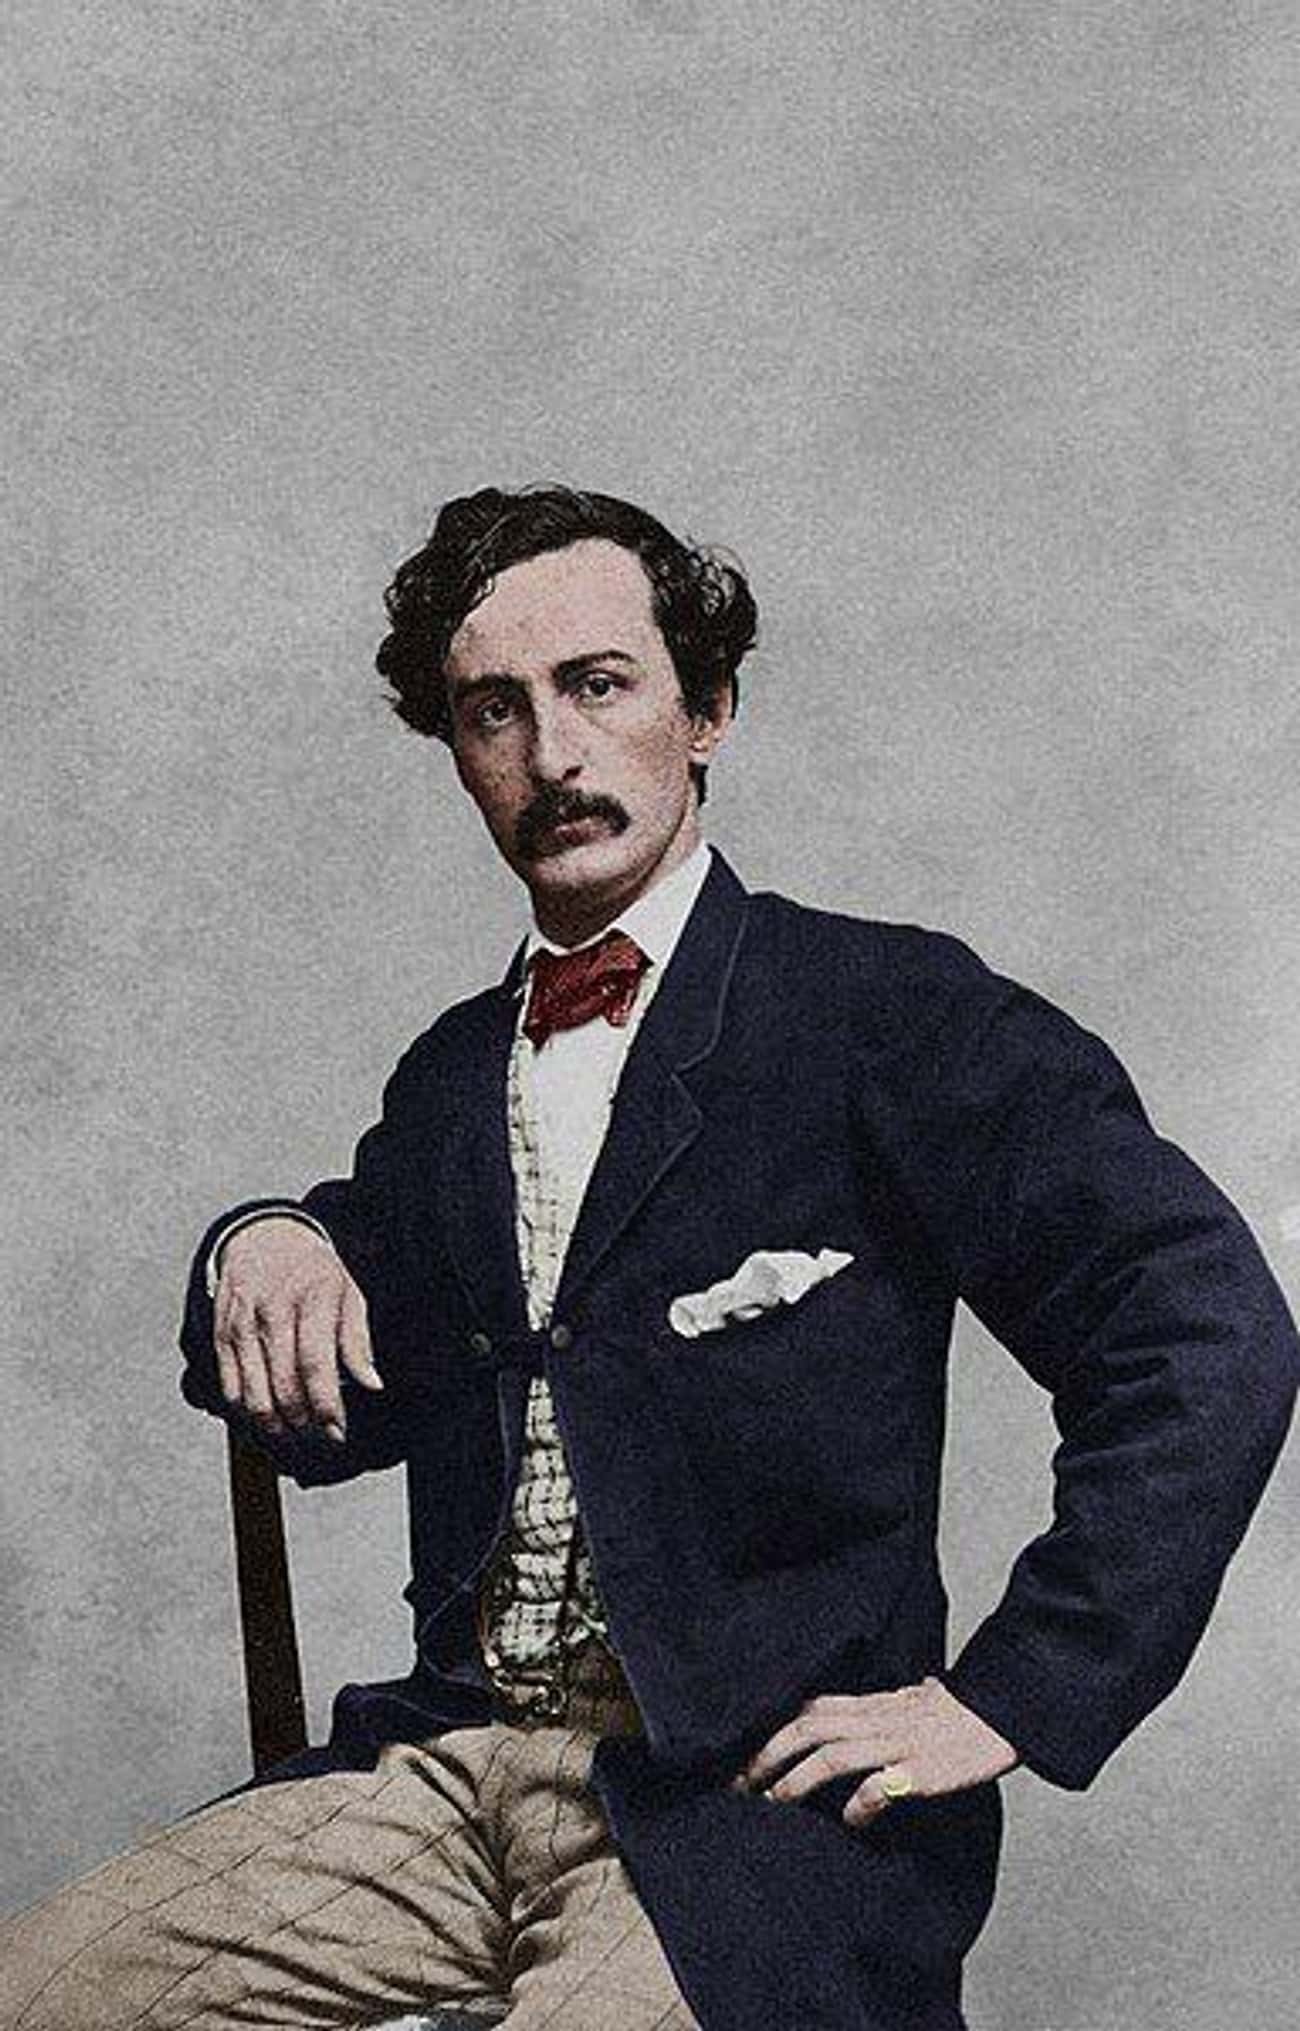 John Wilkes Booth Told The Men Sent To Capture Him, 'I Will Put A Bullet Through You'